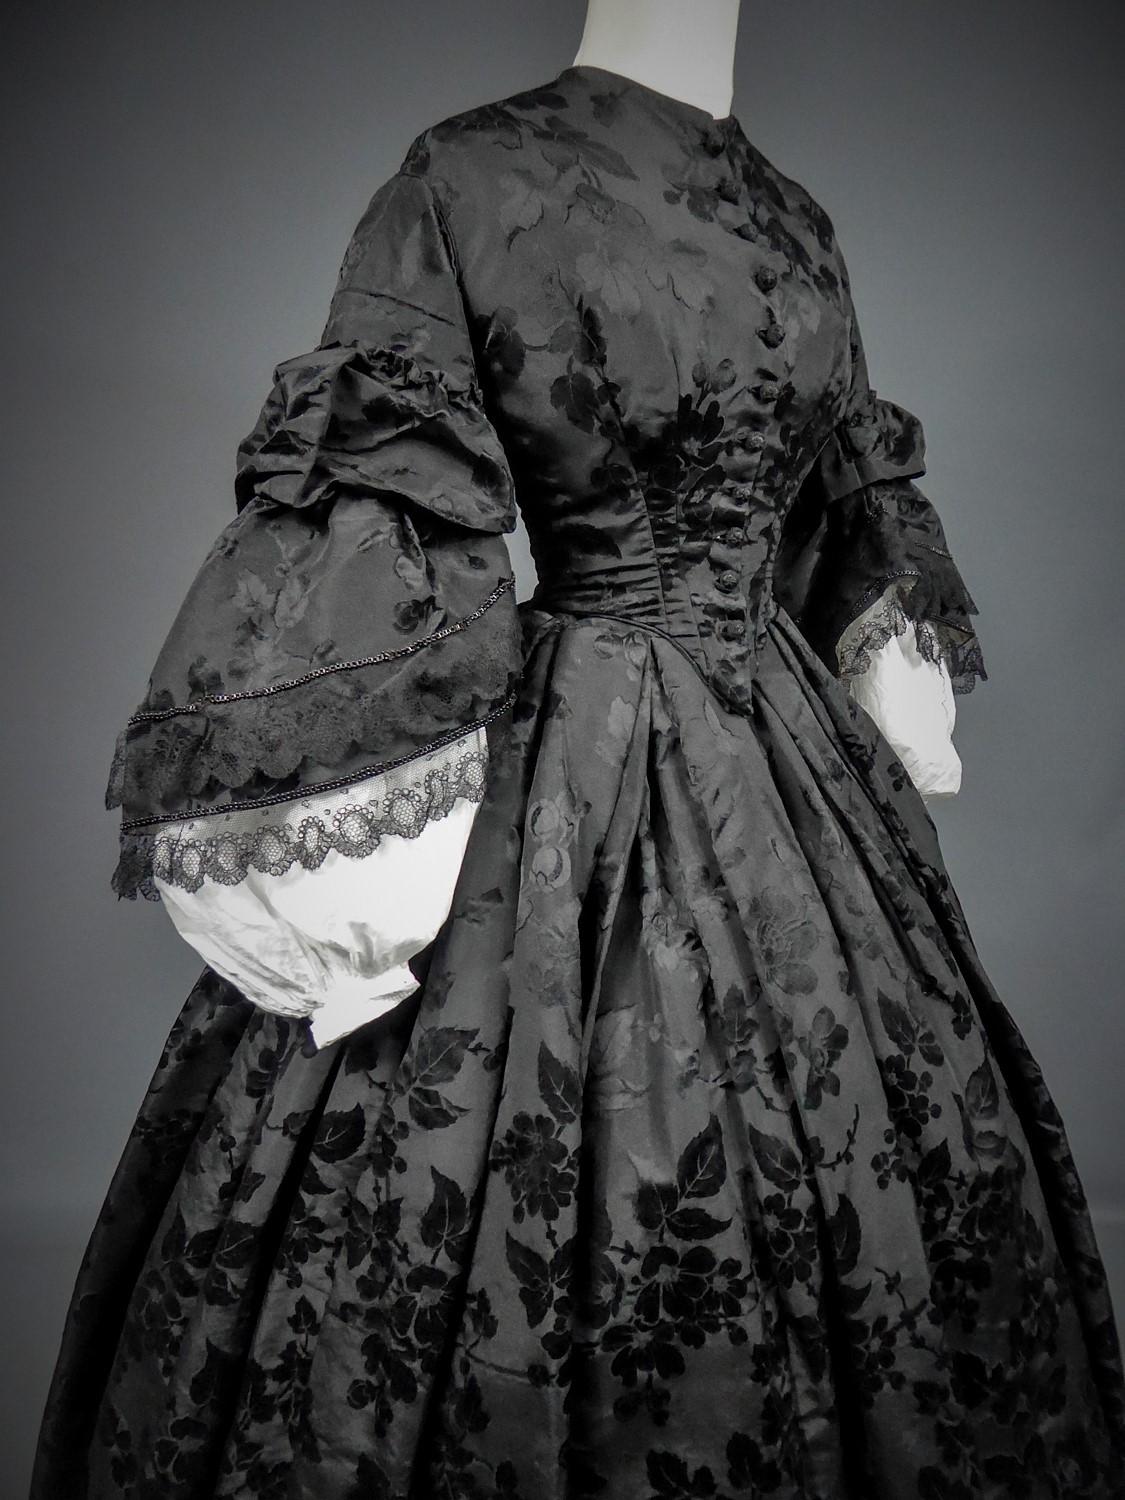 Circa 1862/1865
France

Mourning crinoline dress (bodice and skirt) in flowery damask silk faille dating from the end of the Second French Empire. Bodice and adjoining skirt in satin damask faille or Gros de Tour. Lined and boned bodice with large